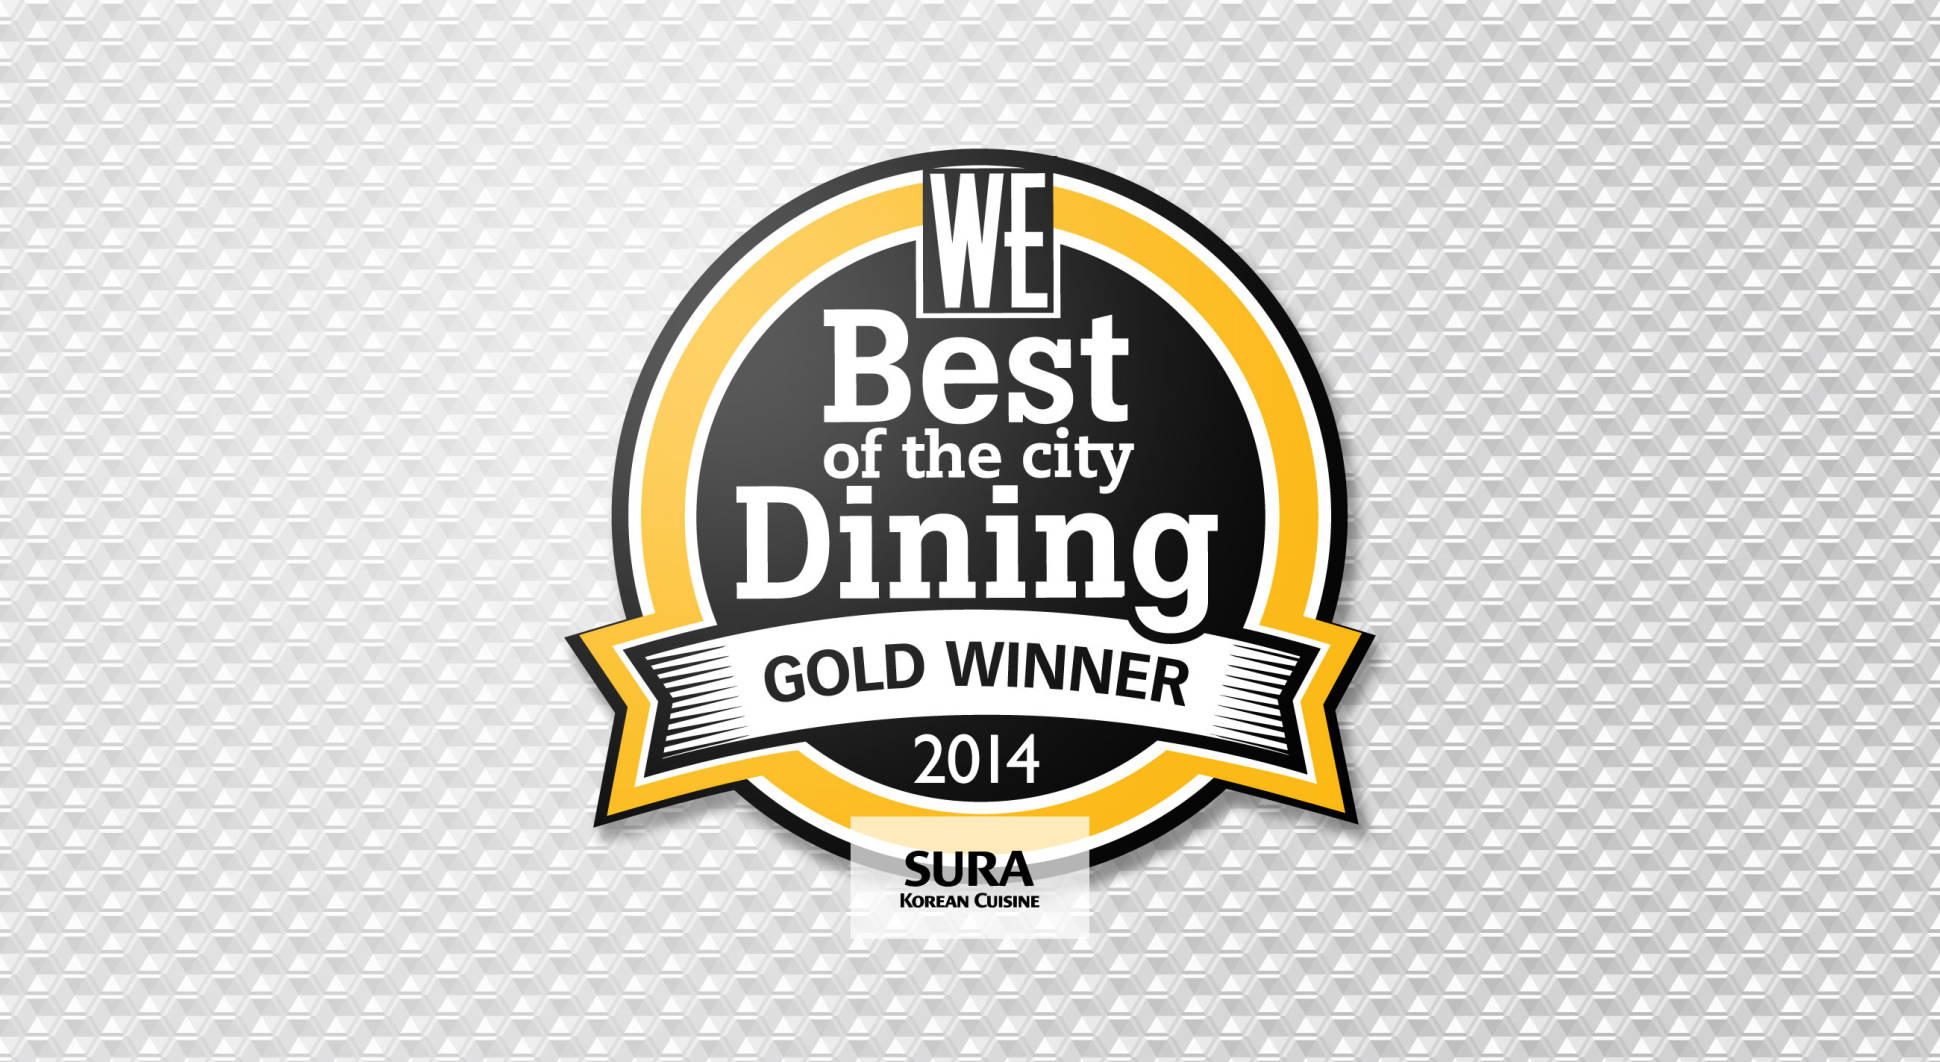 Sura is the best Korean winner of WE Vancouver’s best of the city dining awards 2014